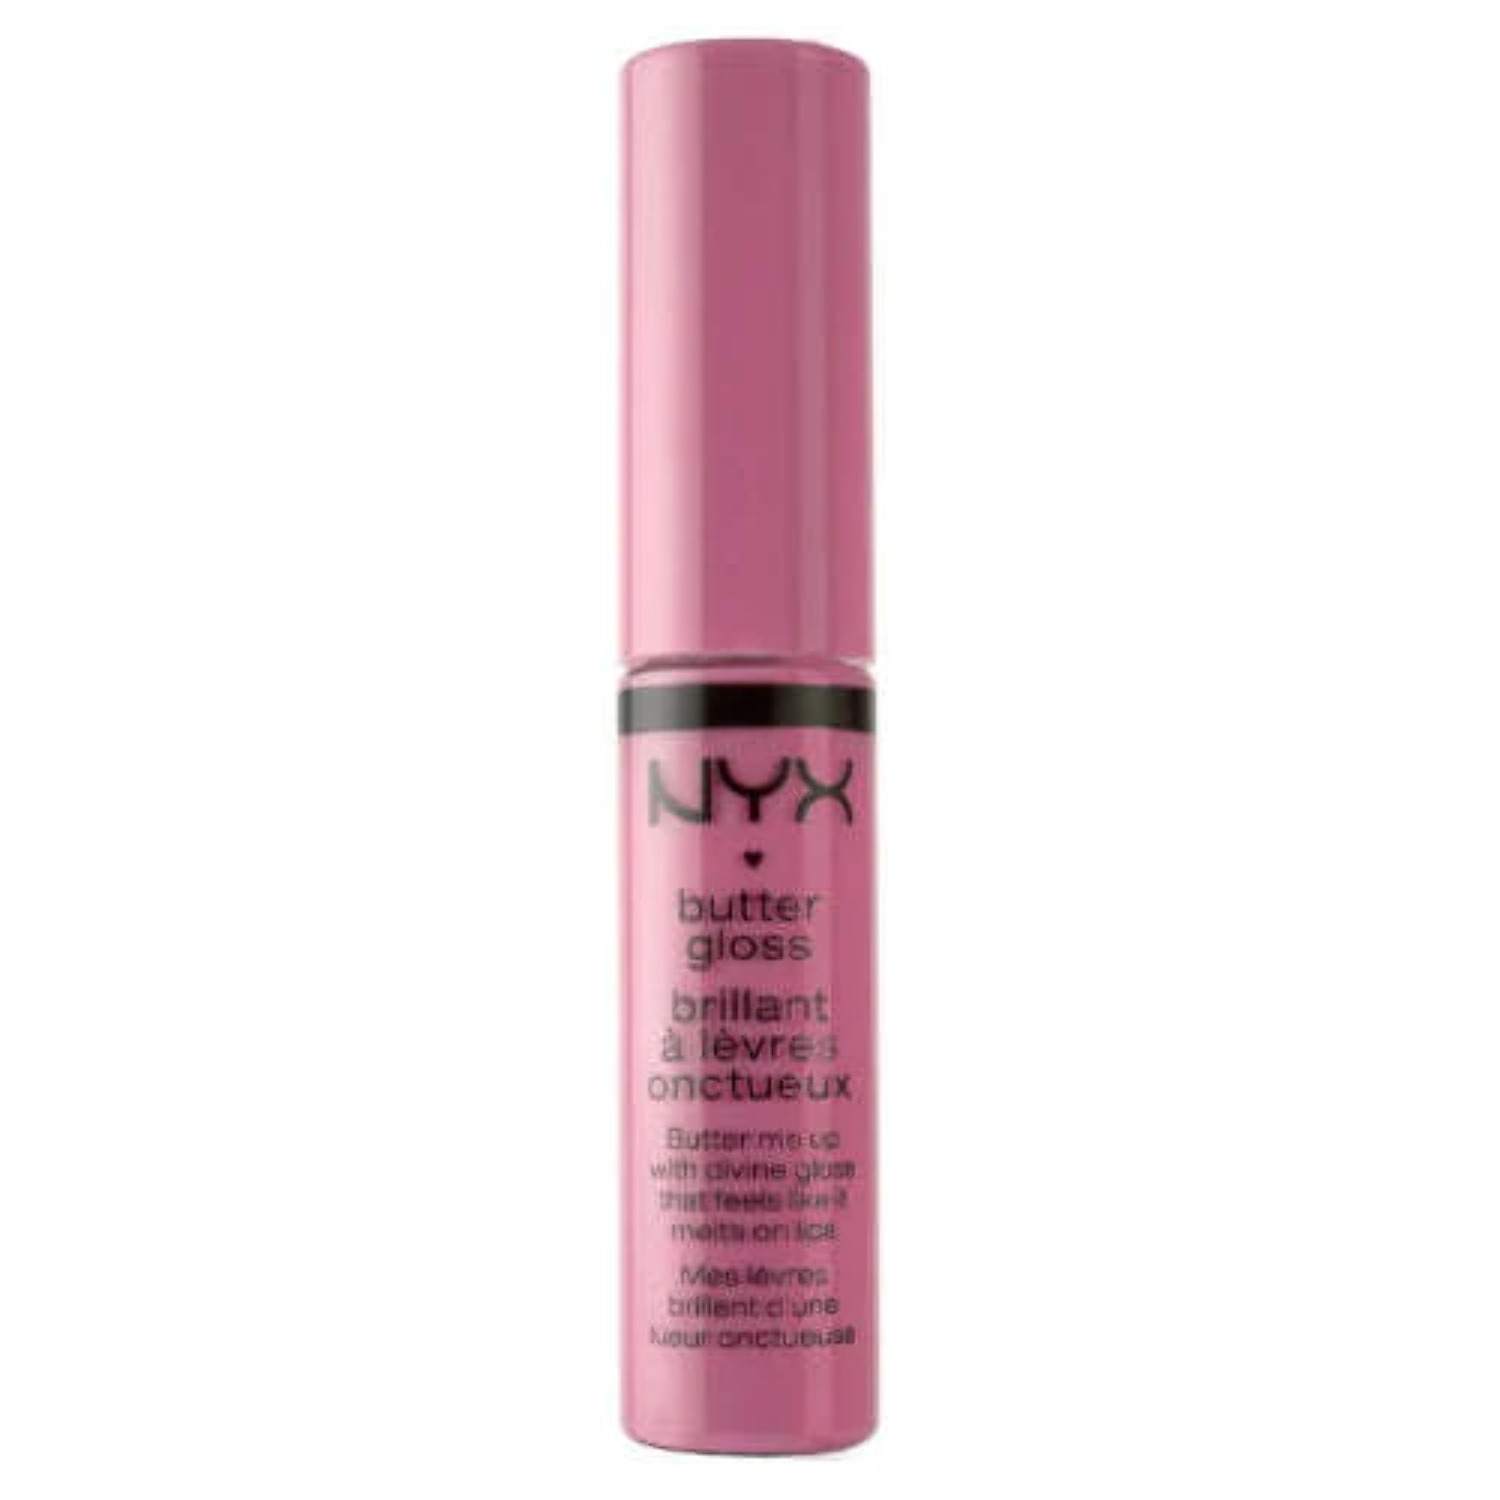 NYX Professional Makeup Butter Gloss, Non-Sticky Lip Gloss, Devil's Food Cake, 0.27 Oz - image 3 of 13